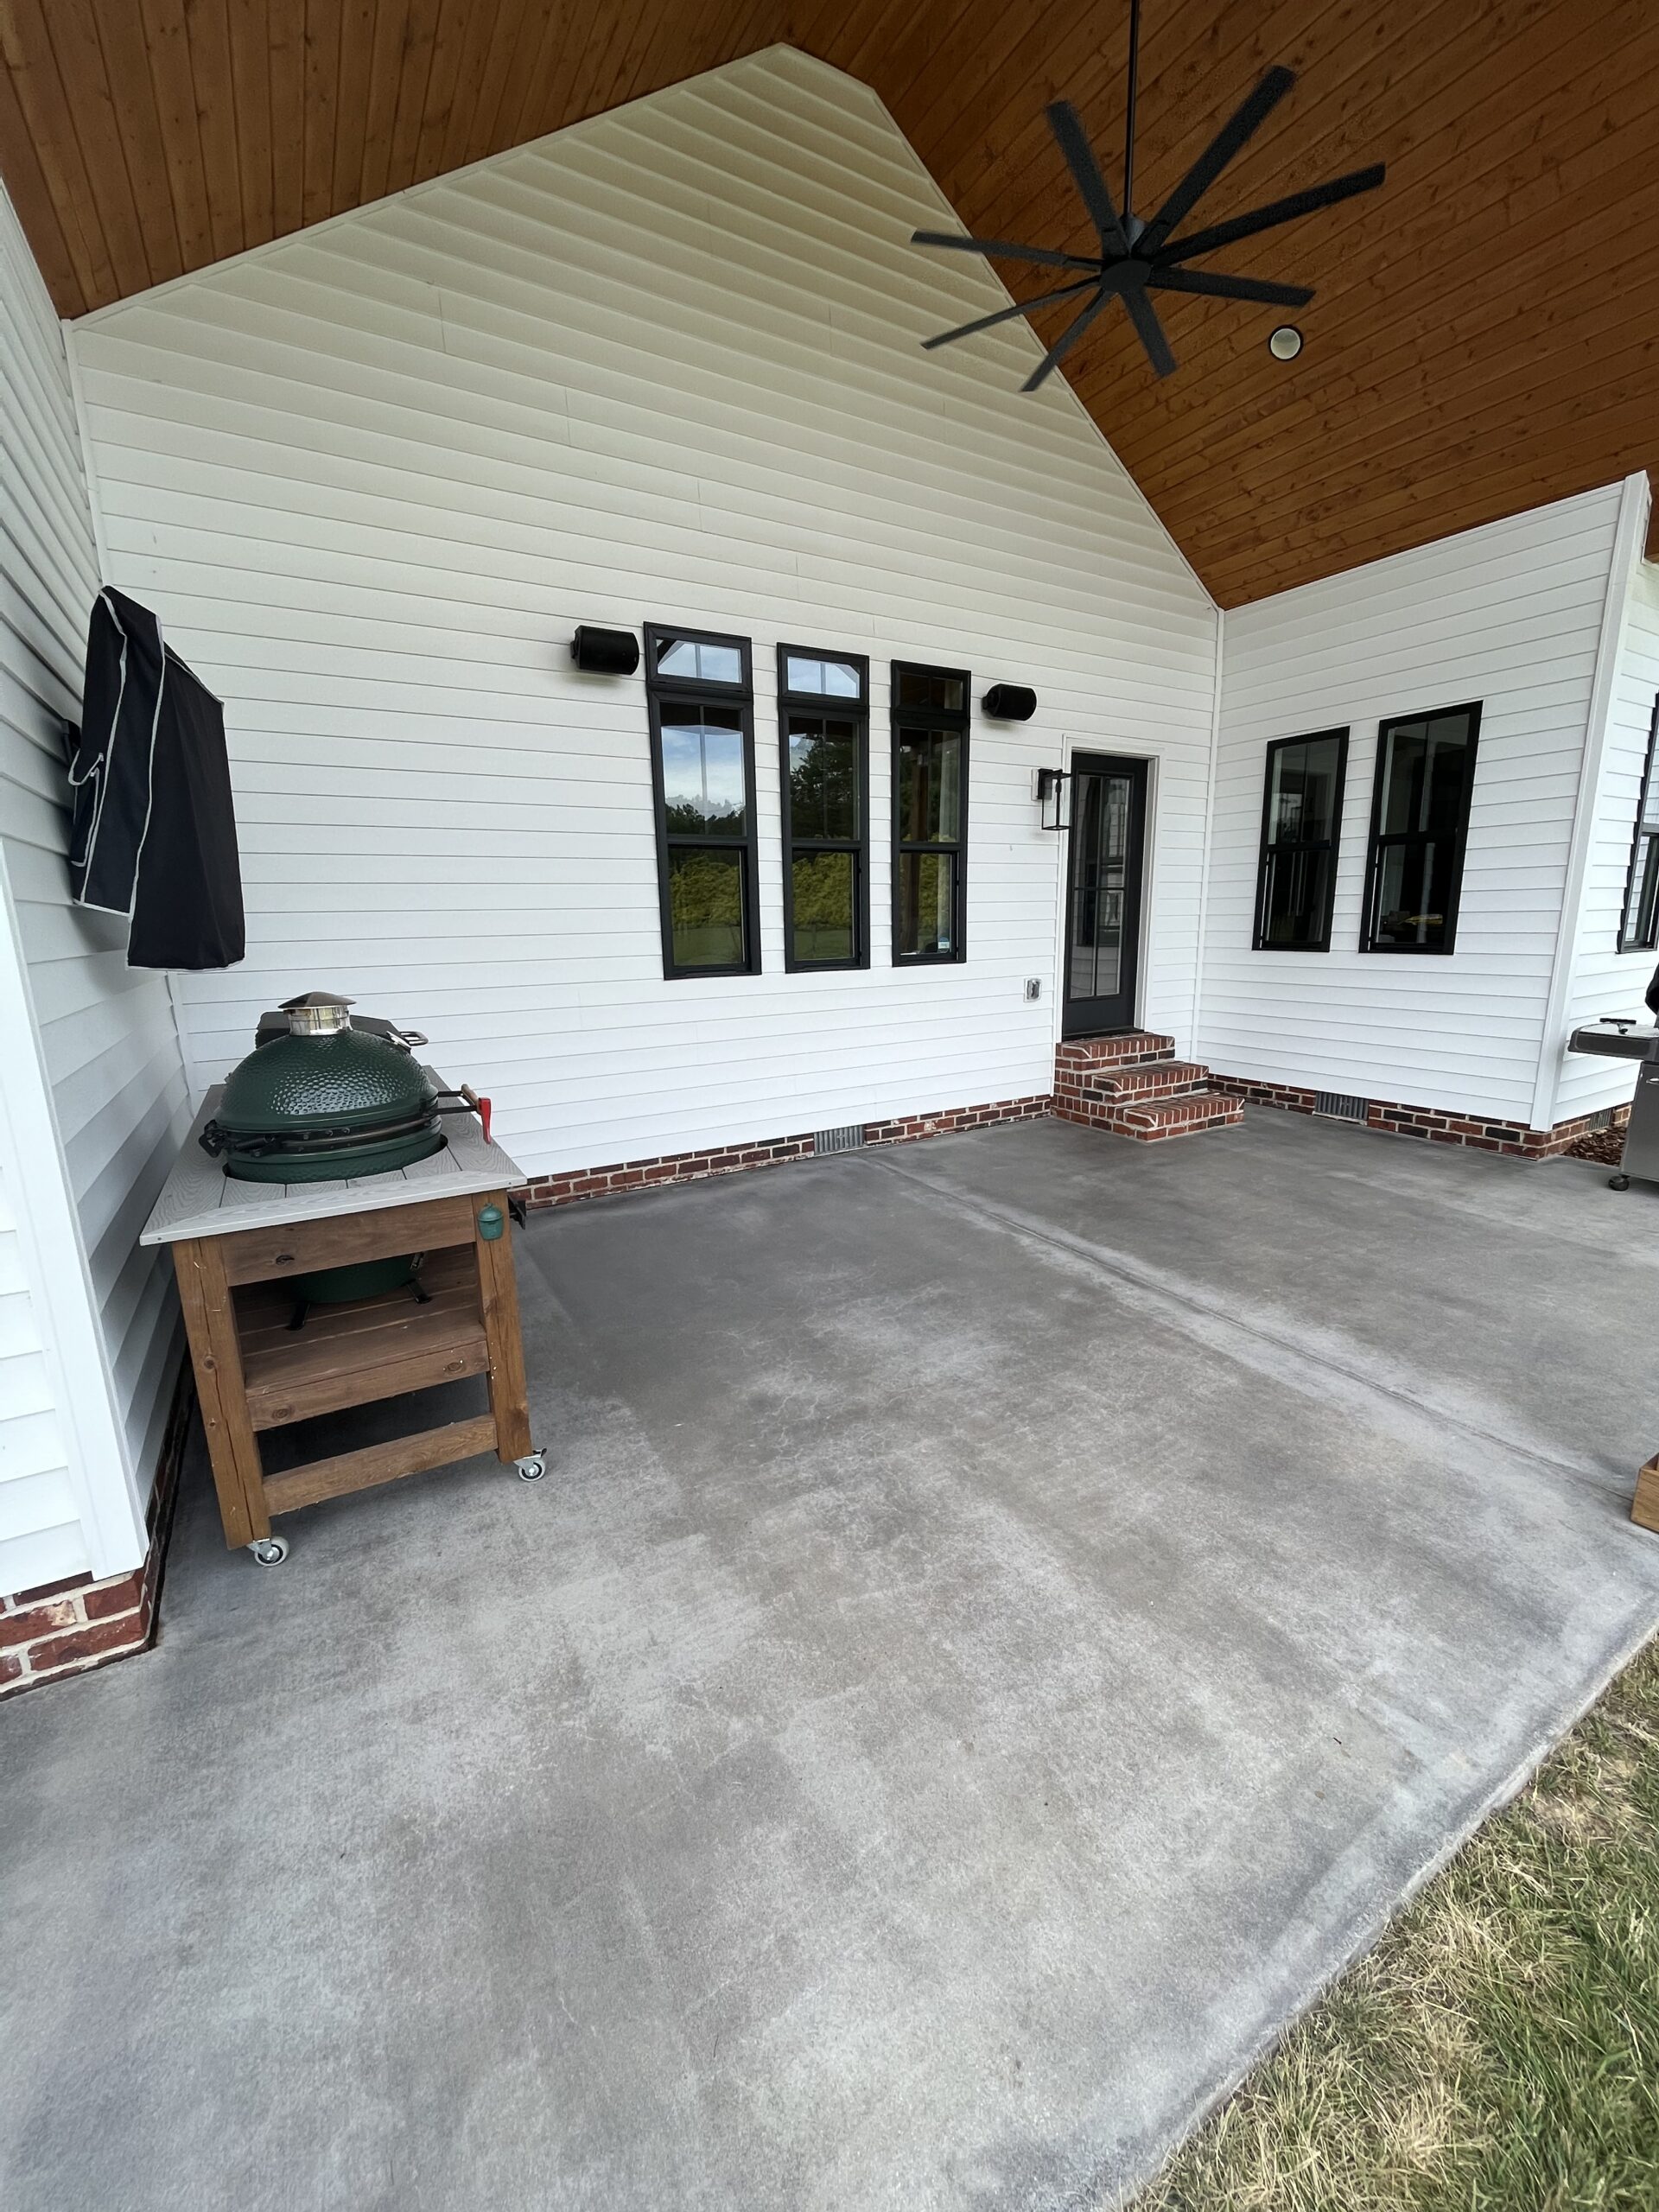 Image displaying the concrete covered patio post-application of Silver Gray Antiquing stain, showcasing the dramatic transformation and enhanced aesthetic of the surface.